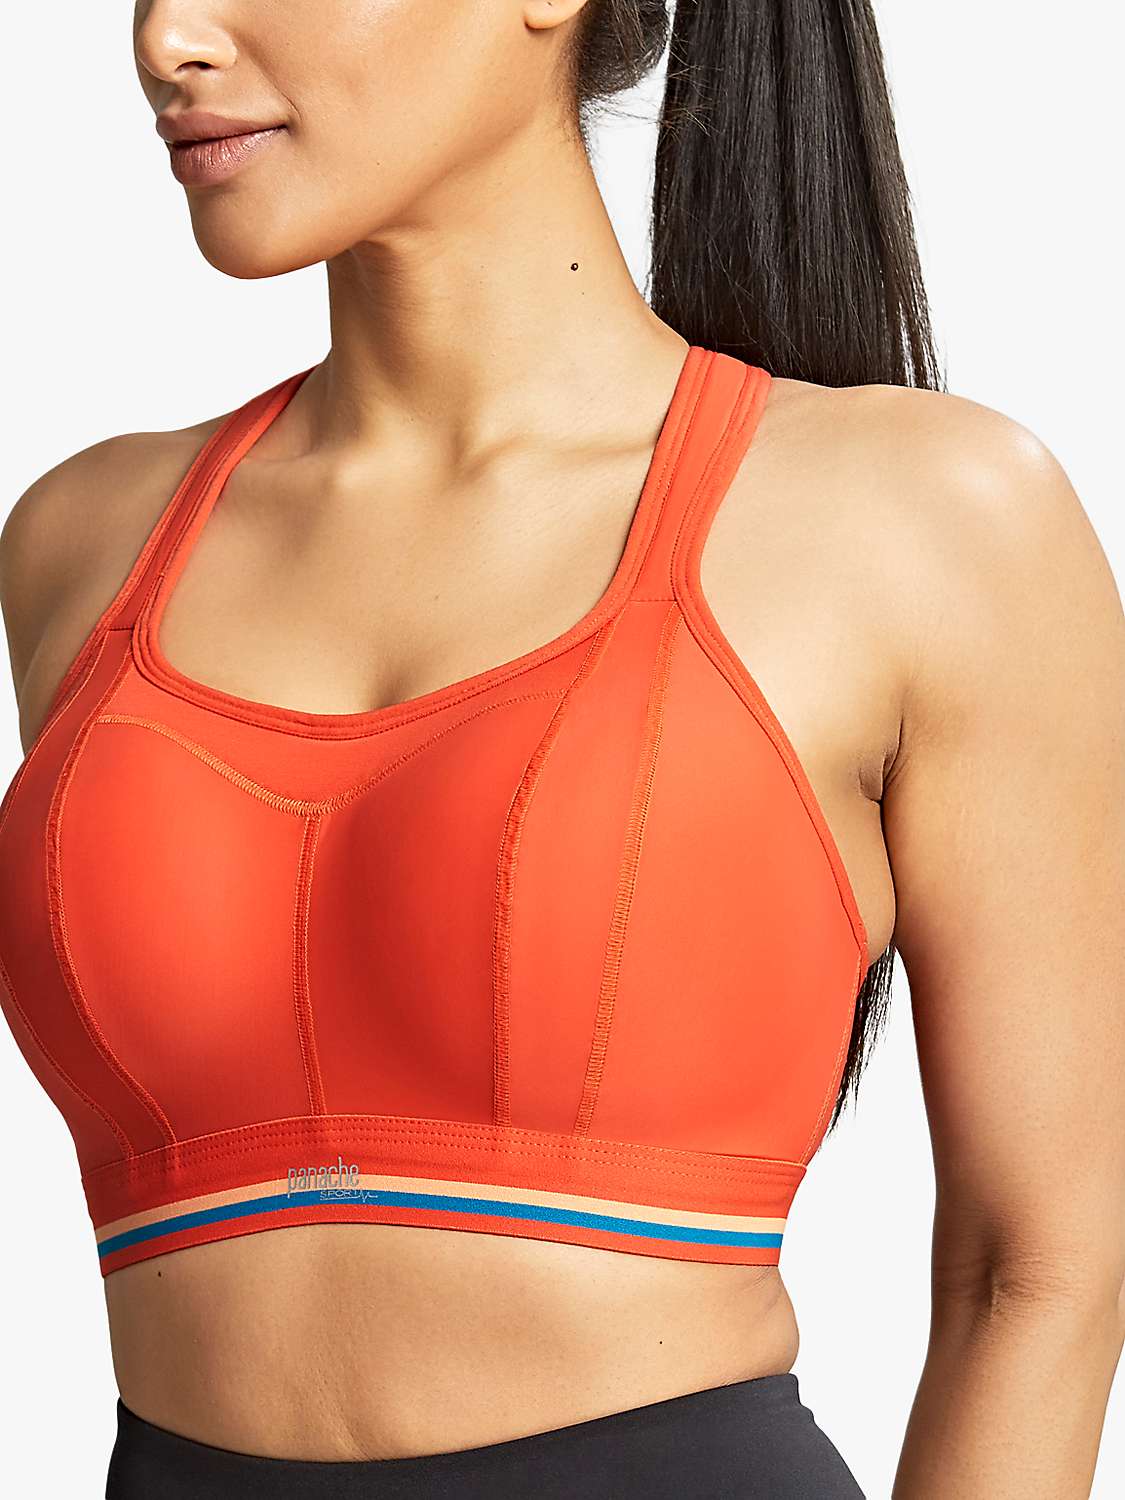 Buy Panache Non Wired Racer Back Sports Bra Online at johnlewis.com